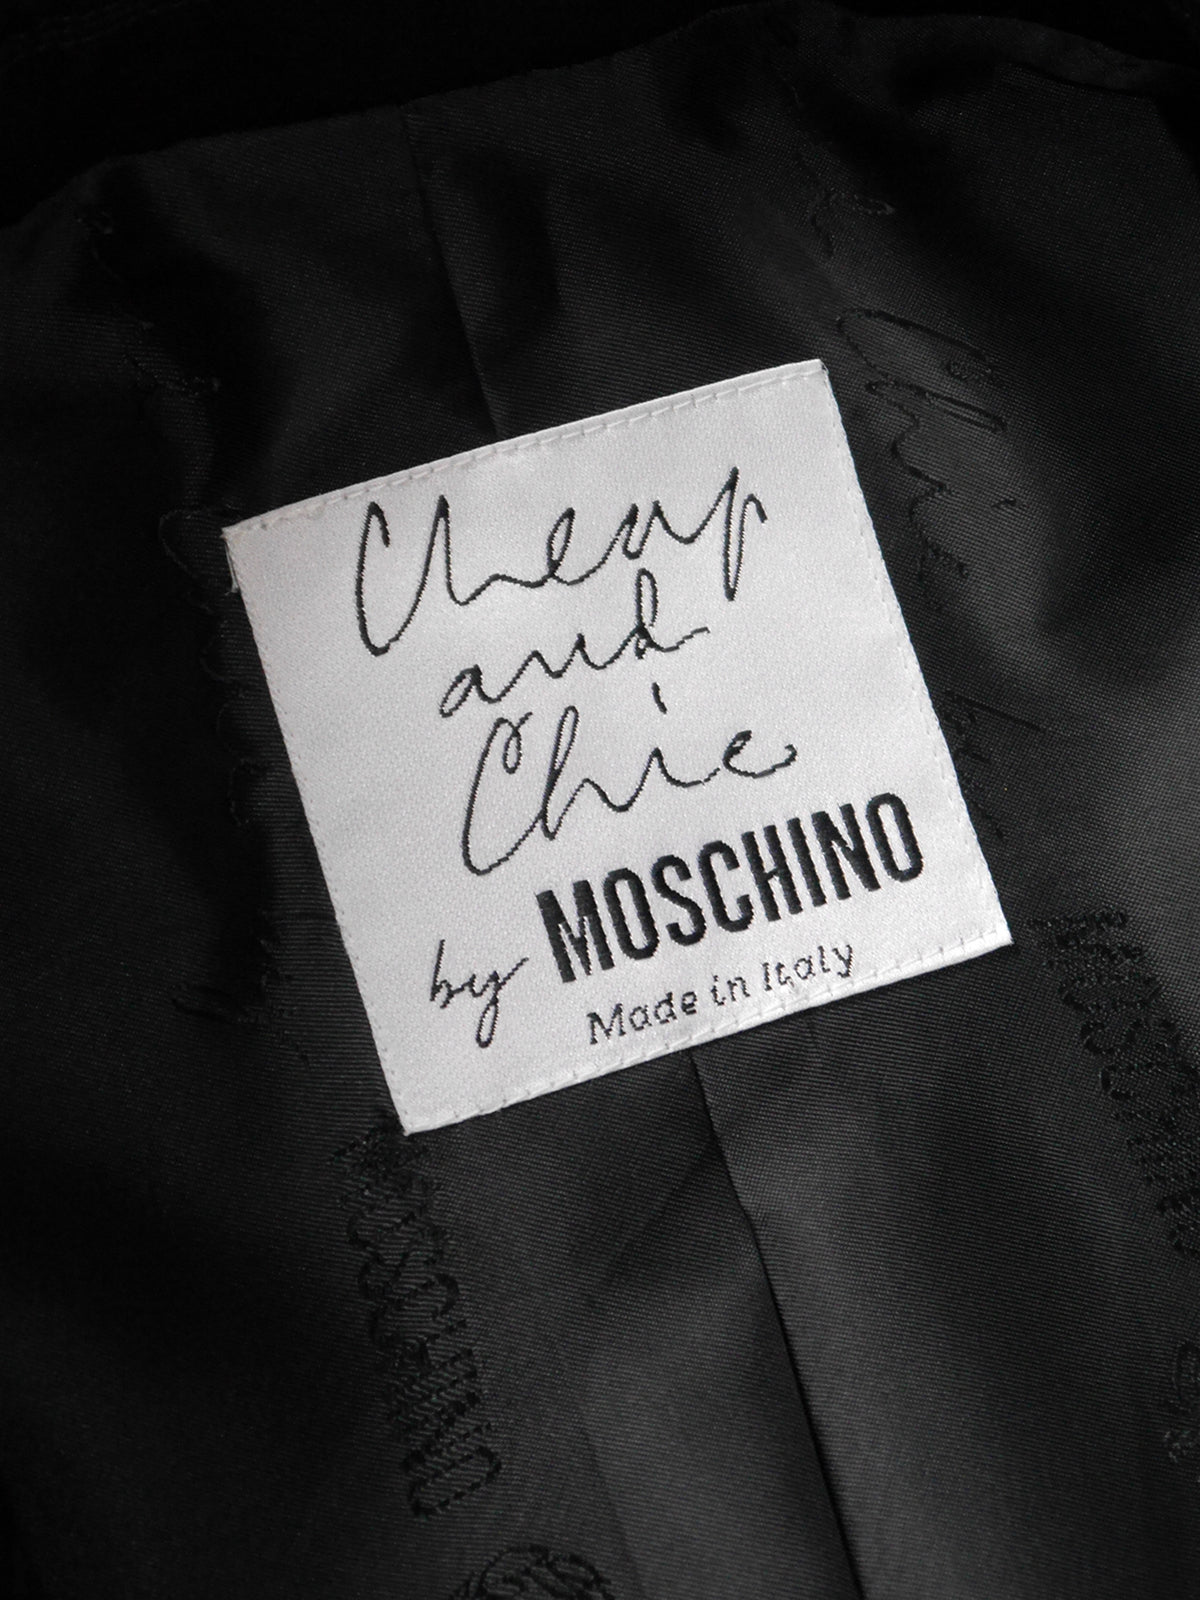 MOSCHINO 1990s Vintage Black "Faucet" Evening Jacket